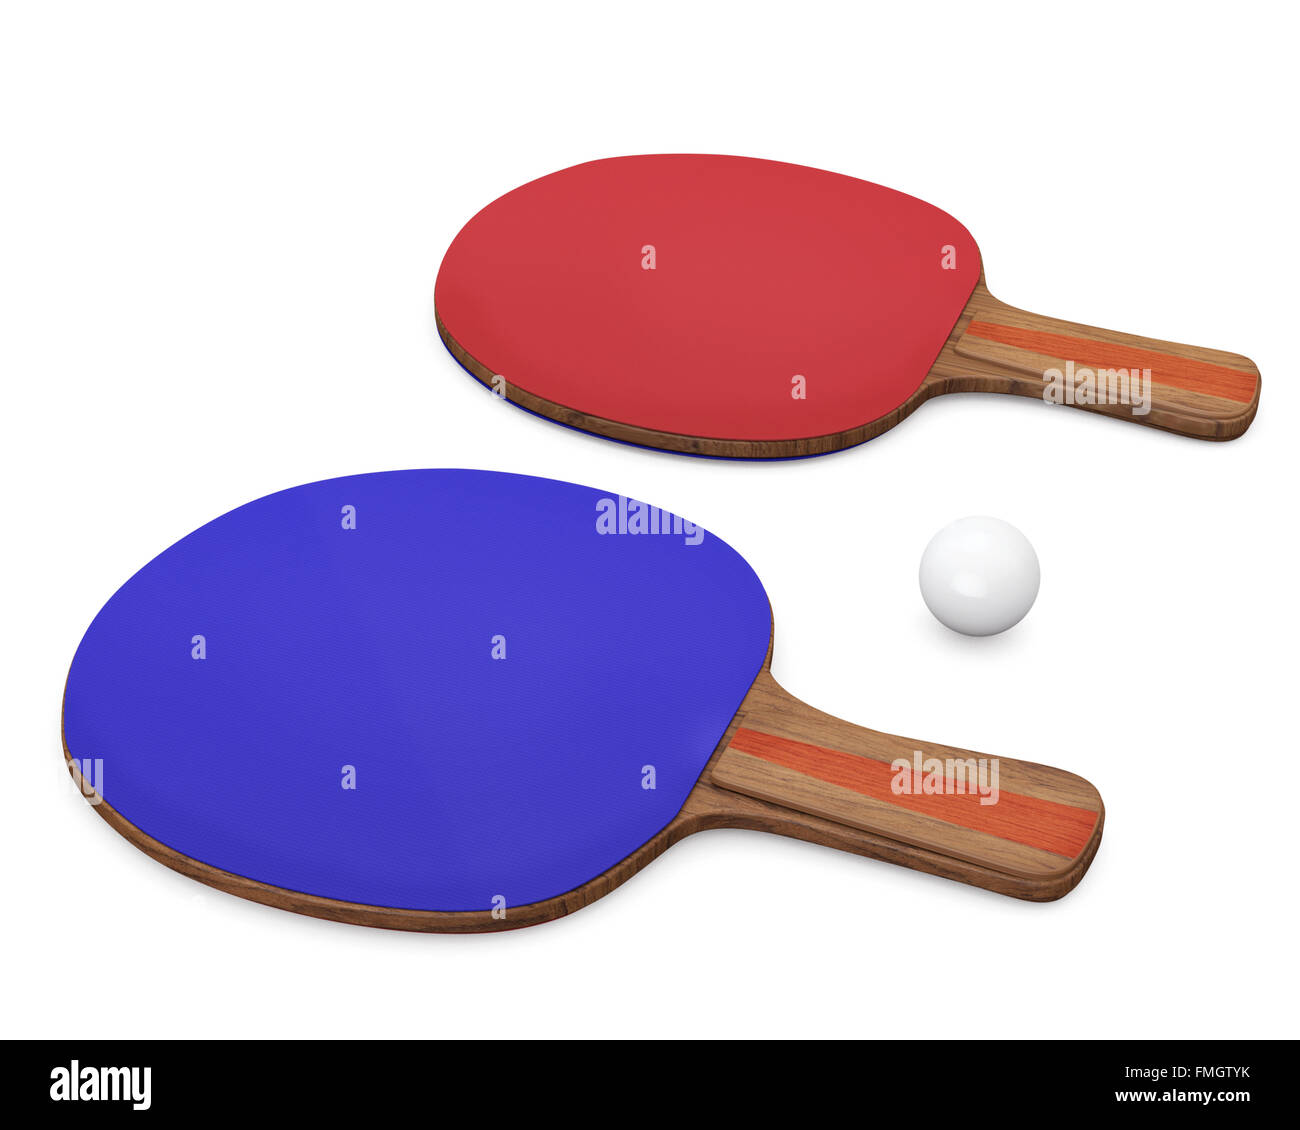 Two ping-pong rackets and ball for playing table tennis isolated on white background. 3D render. Stock Photo